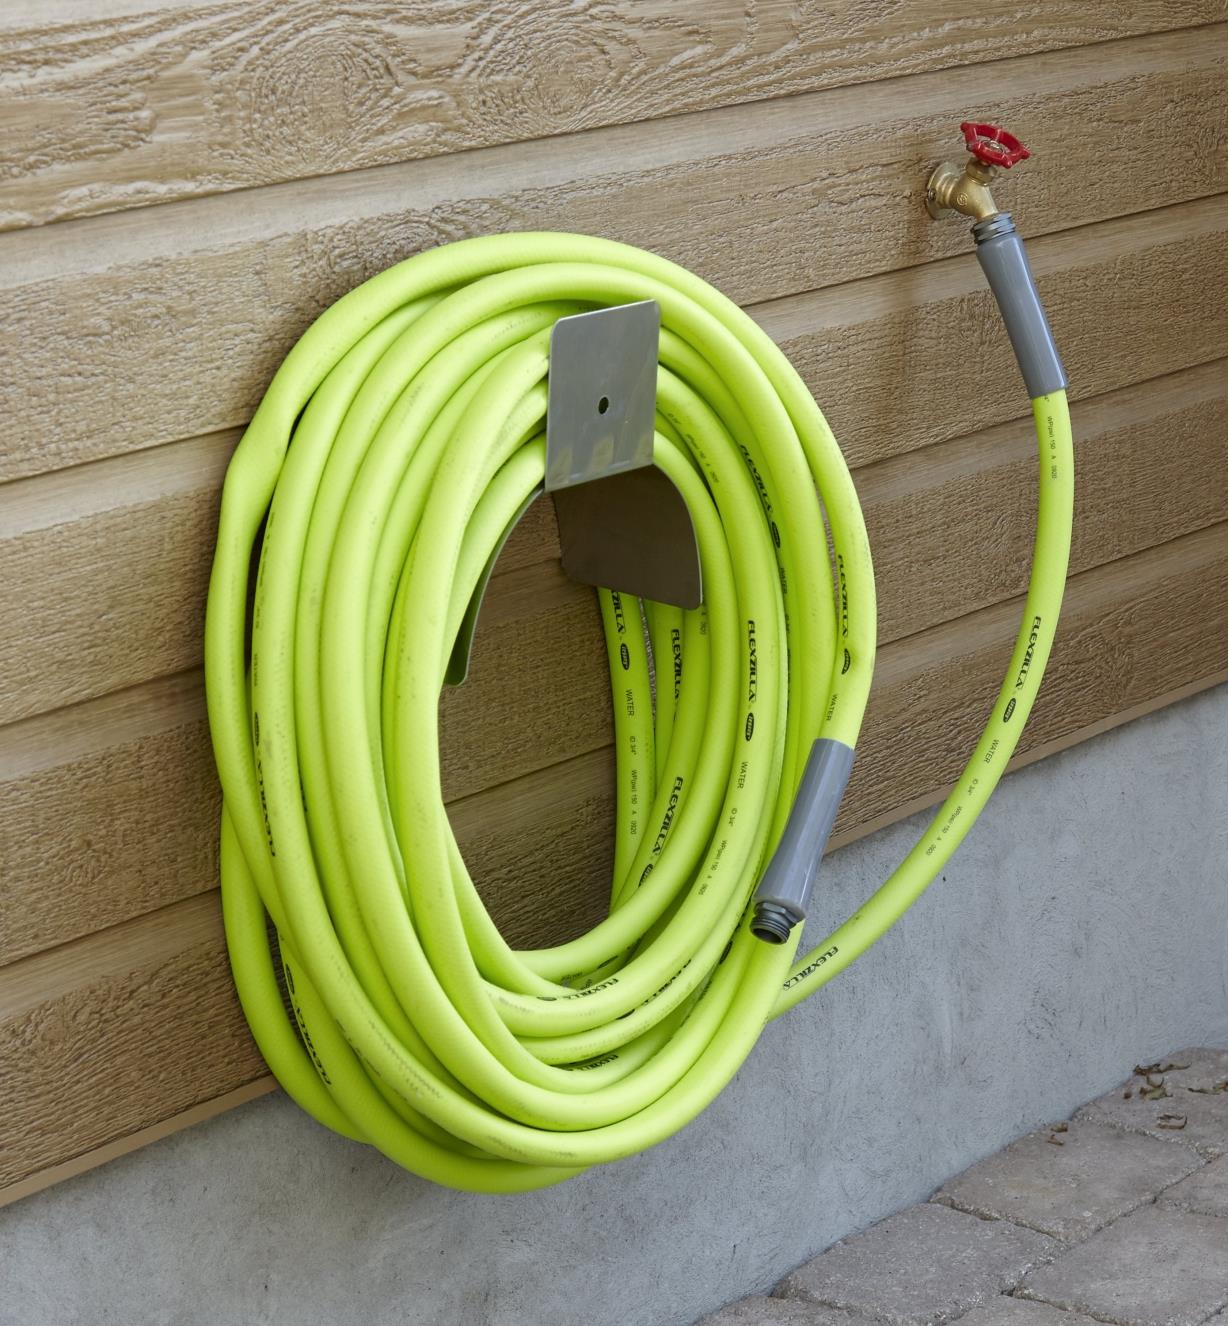 A 75' hose is coiled and hanging on an outdoor wall